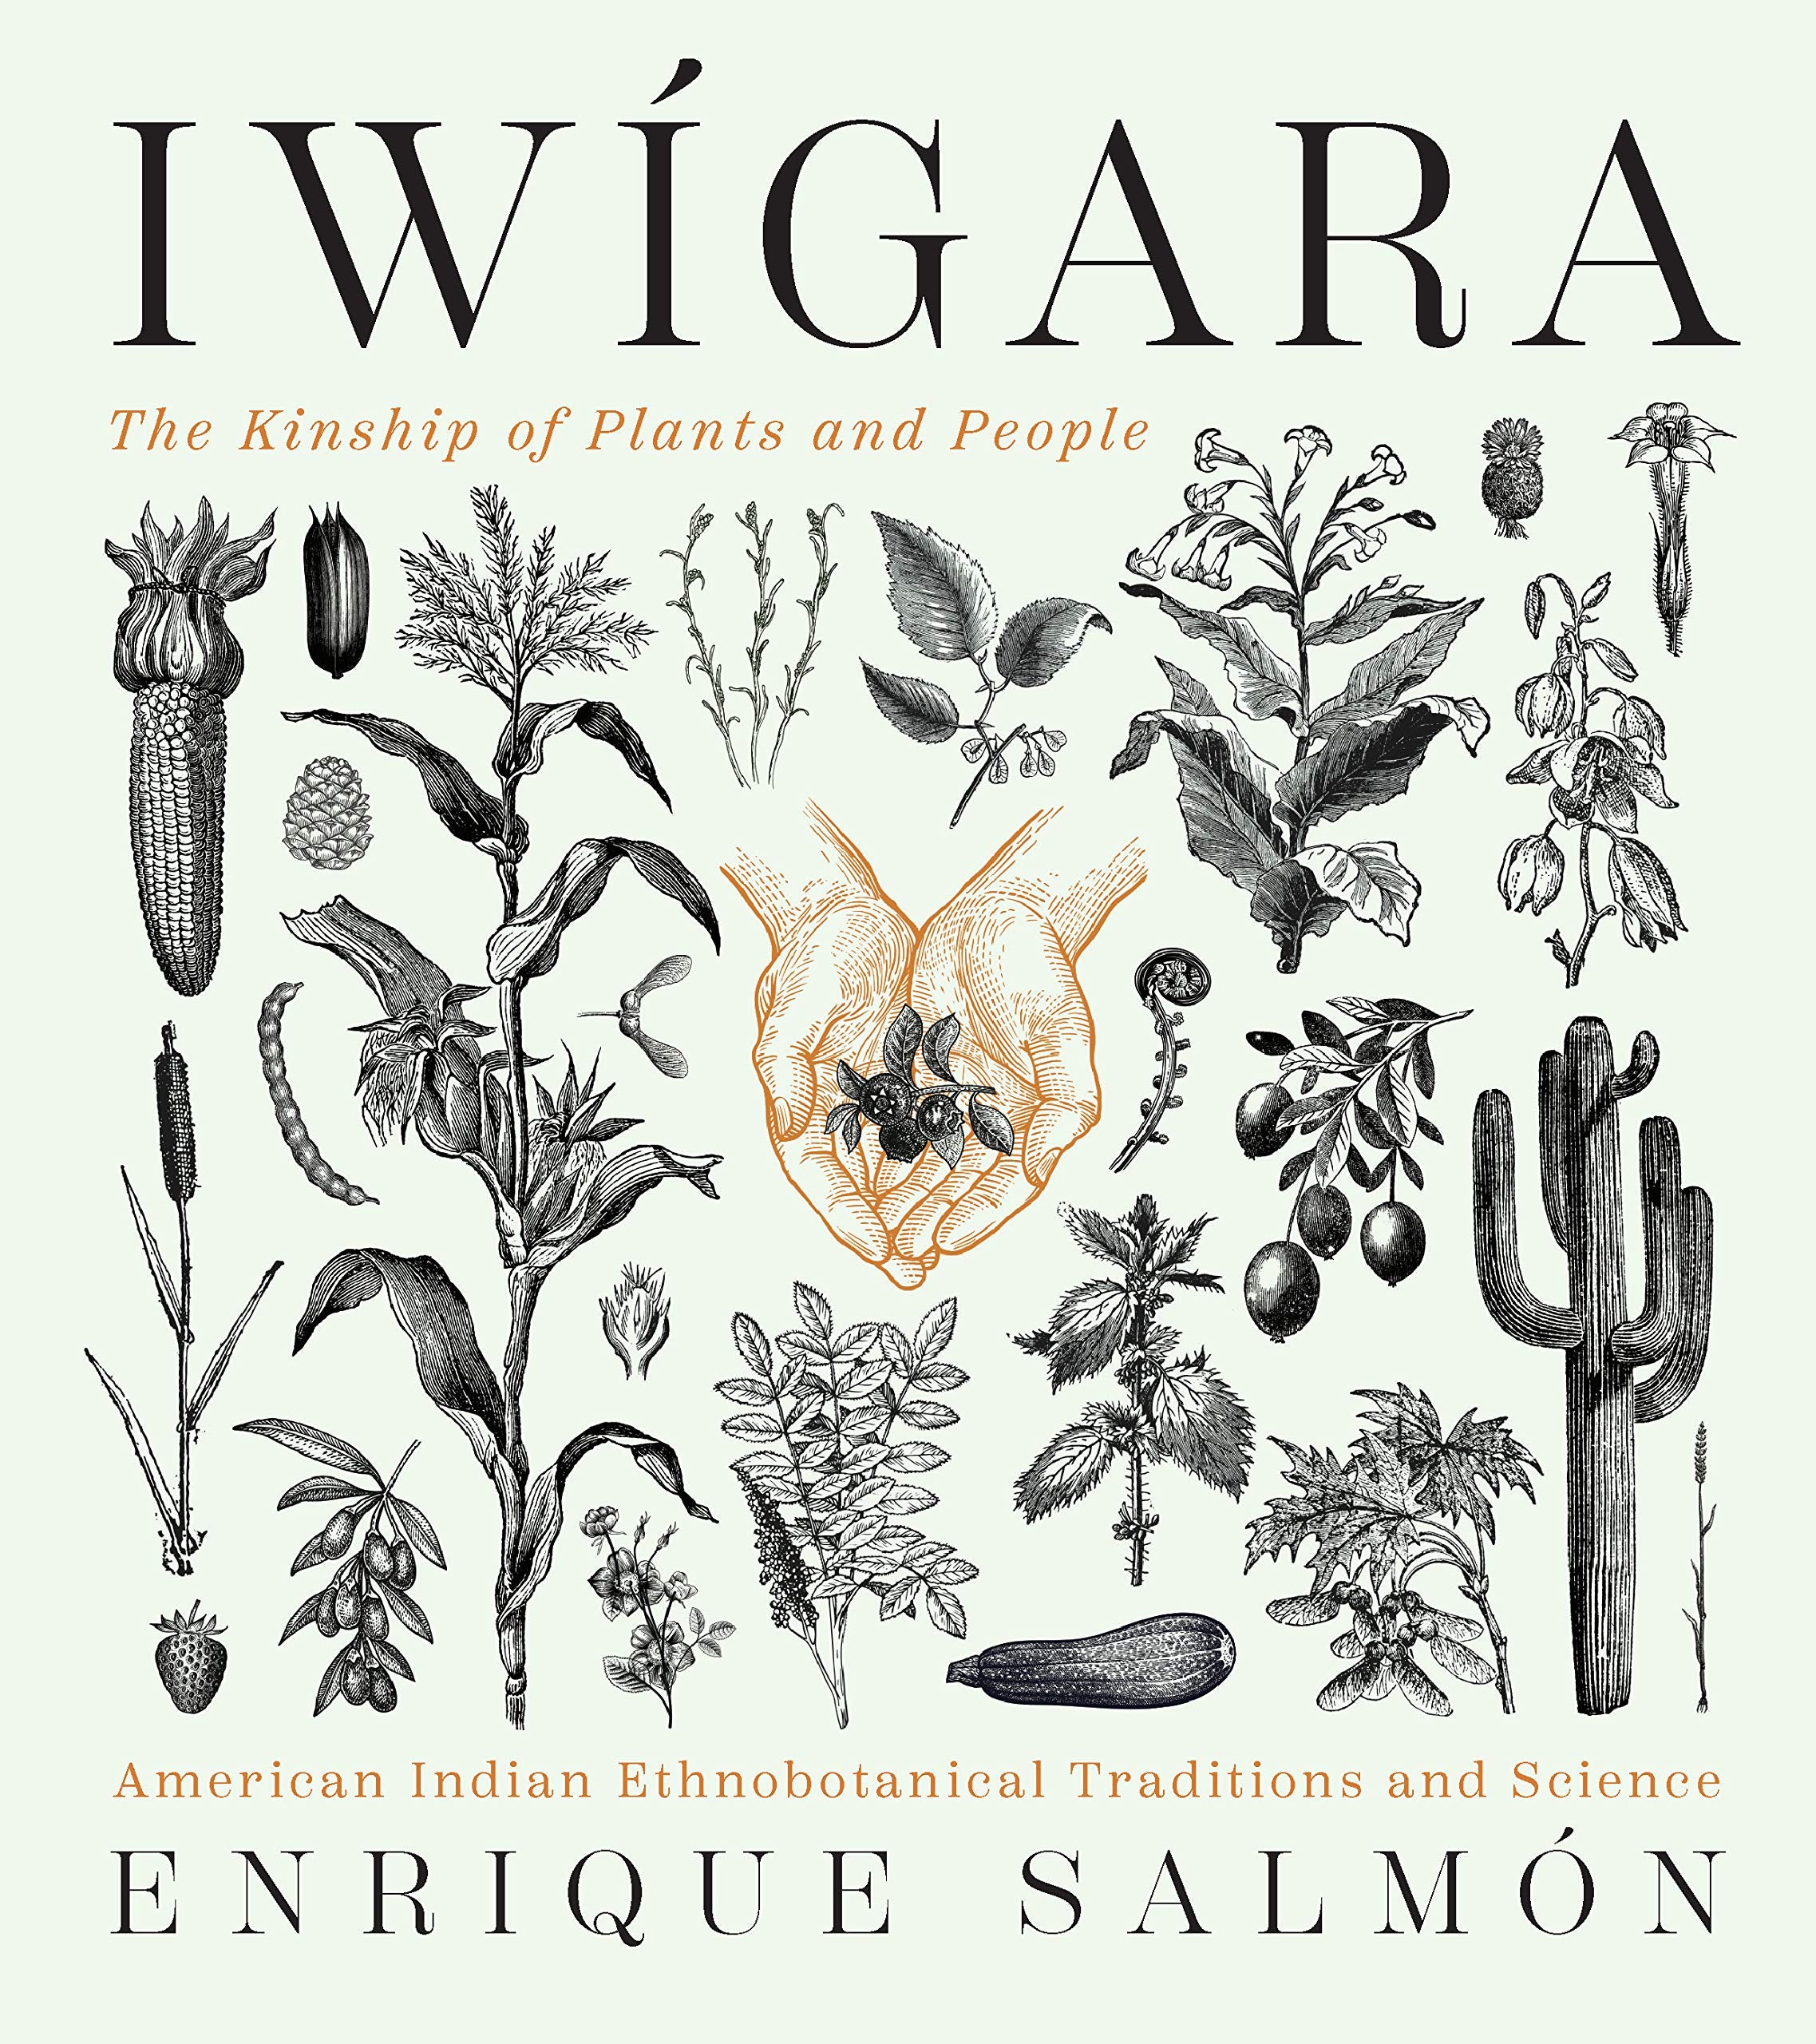 Iwígara: American Indian Ethnobotanical Traditions and Science (Enrique Salmón)